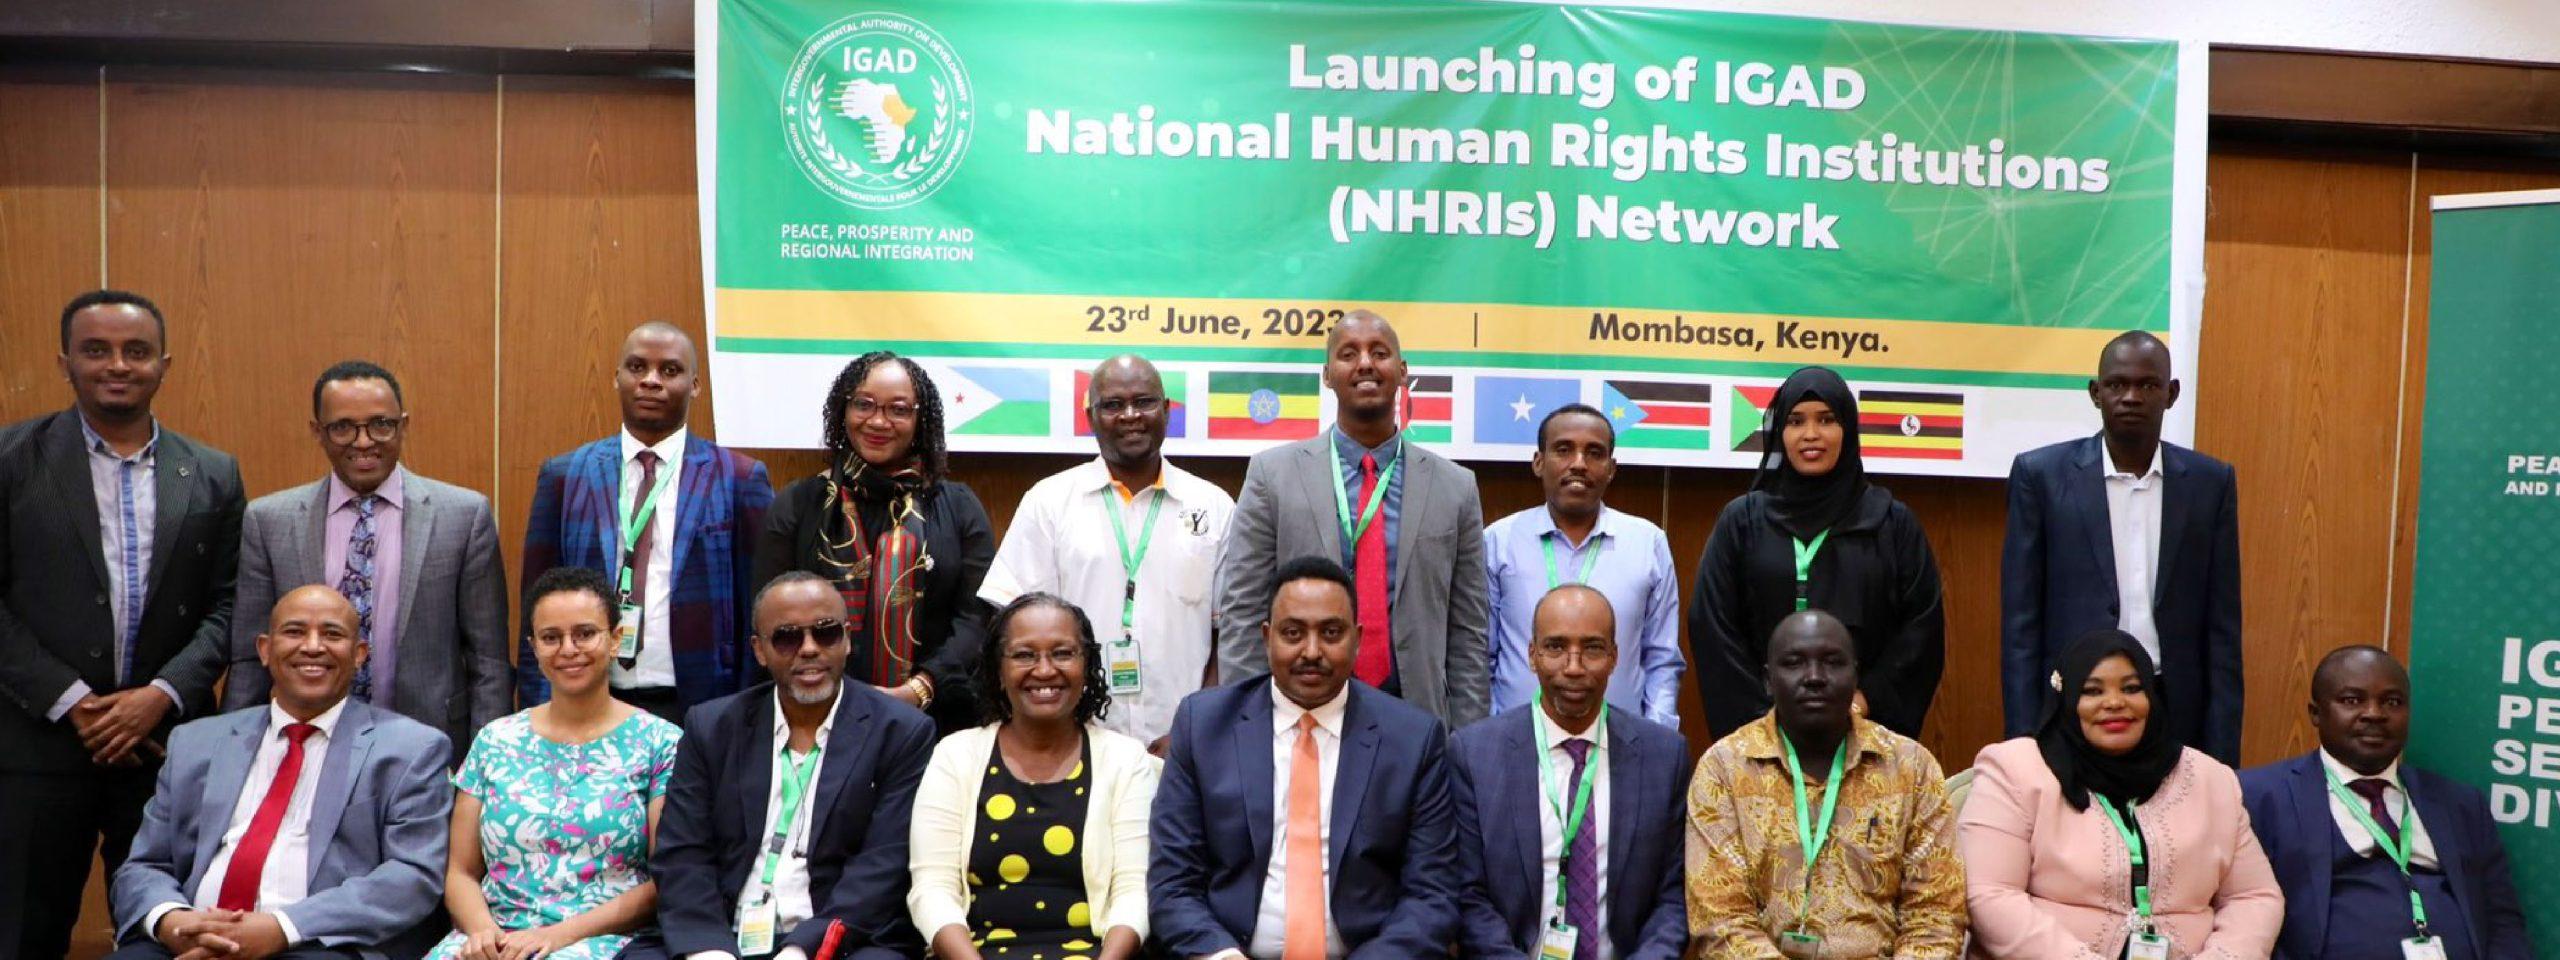 IGAD launches the NHRIs Network and validates its mandate.